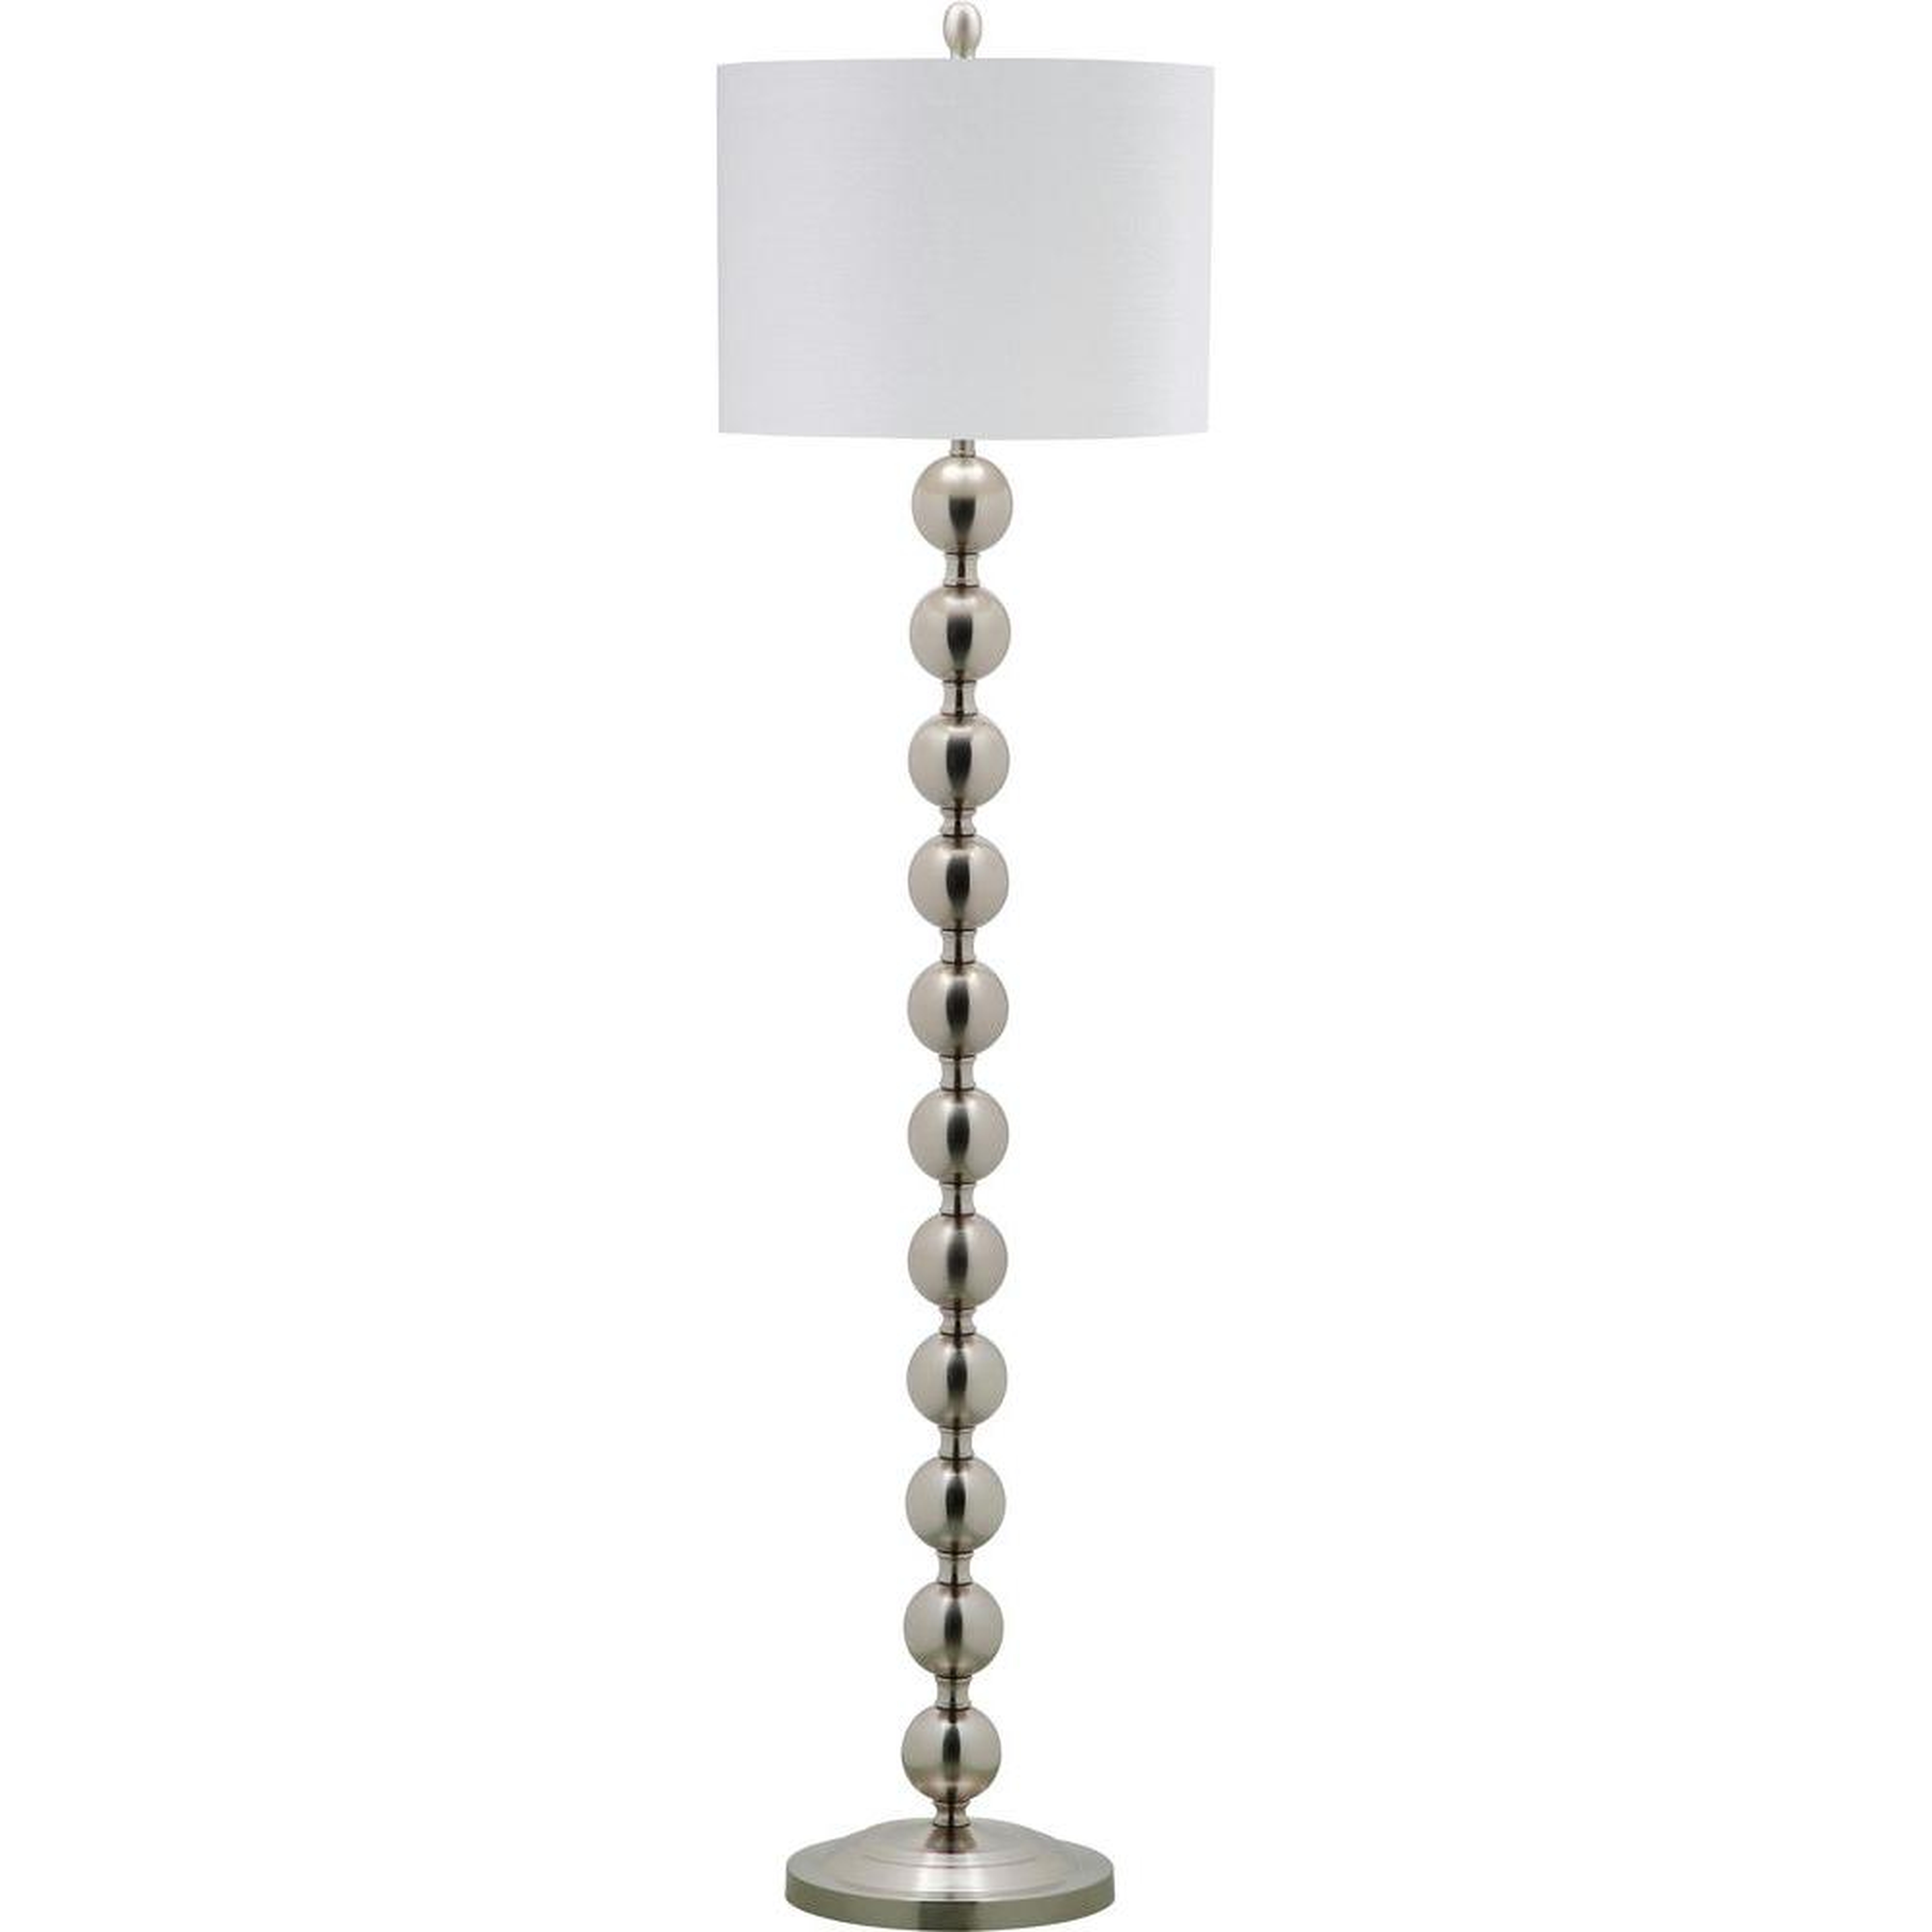 Safavieh Reflections Stacked Ball 58.5 in. Nickel Floor Lamp with White Shade - Home Depot